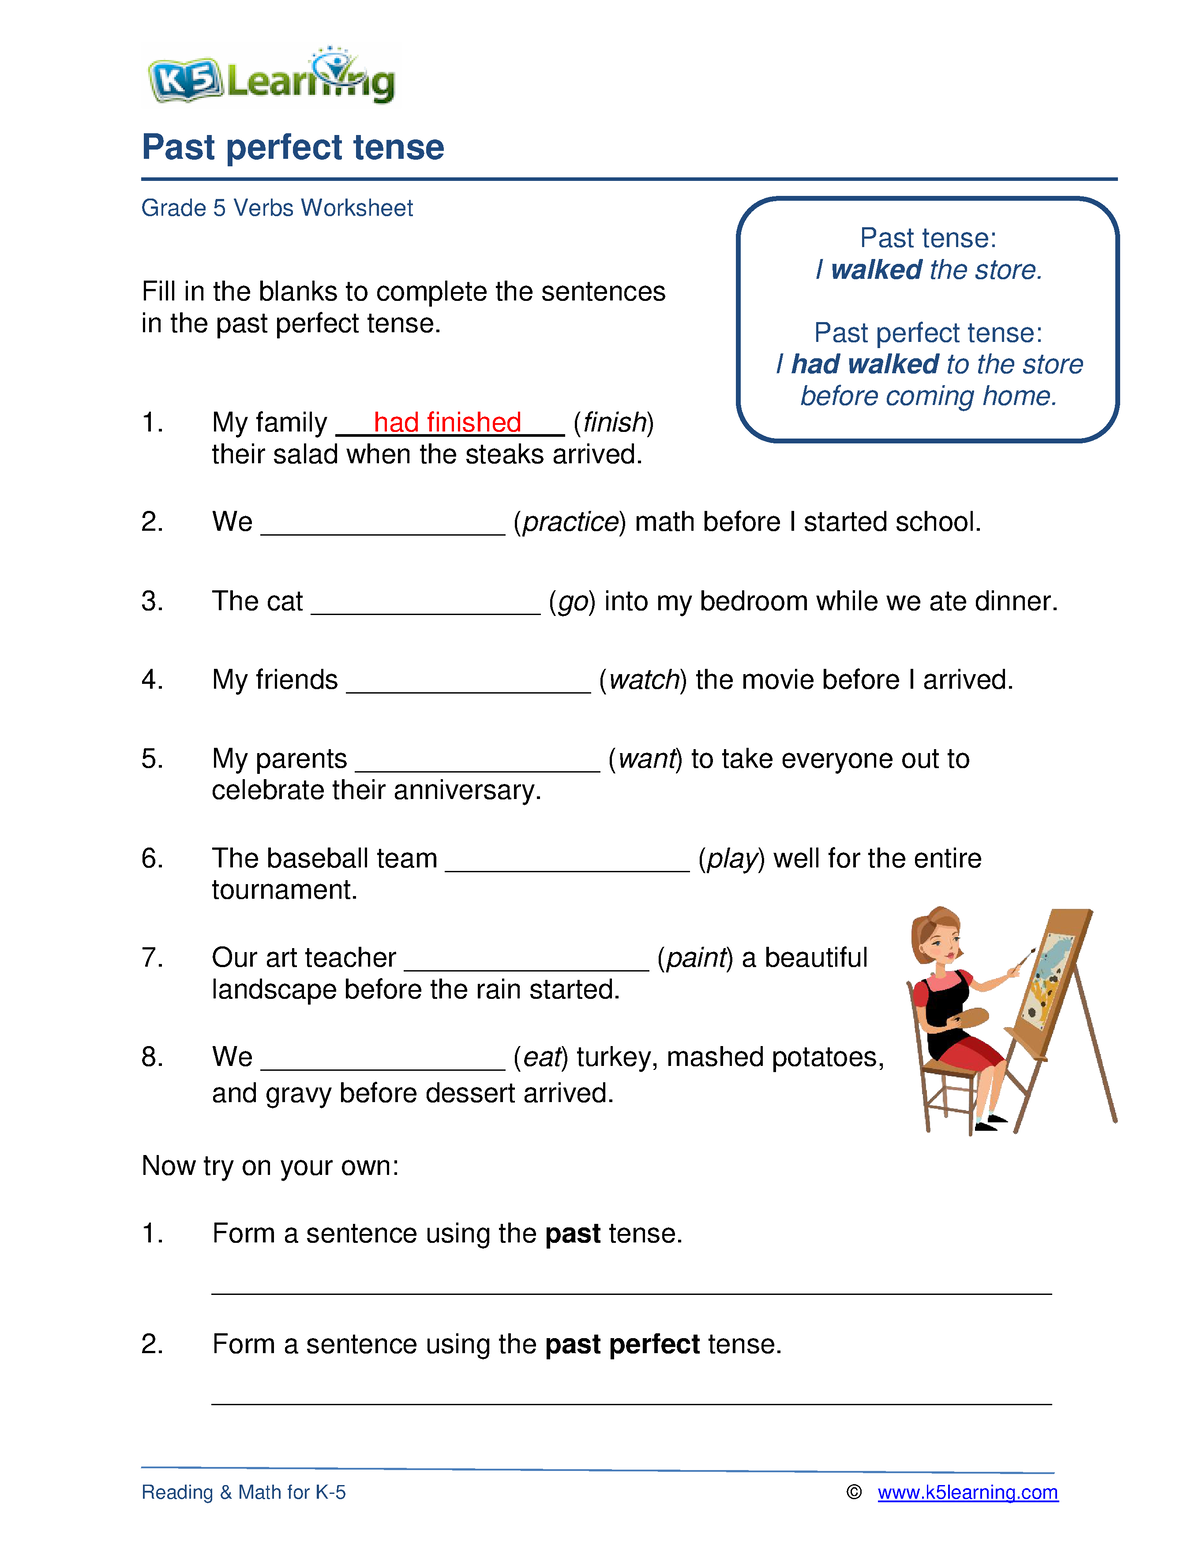 9-best-images-of-present-perfect-exercises-worksheet-present-perfect-already-yet-still-just